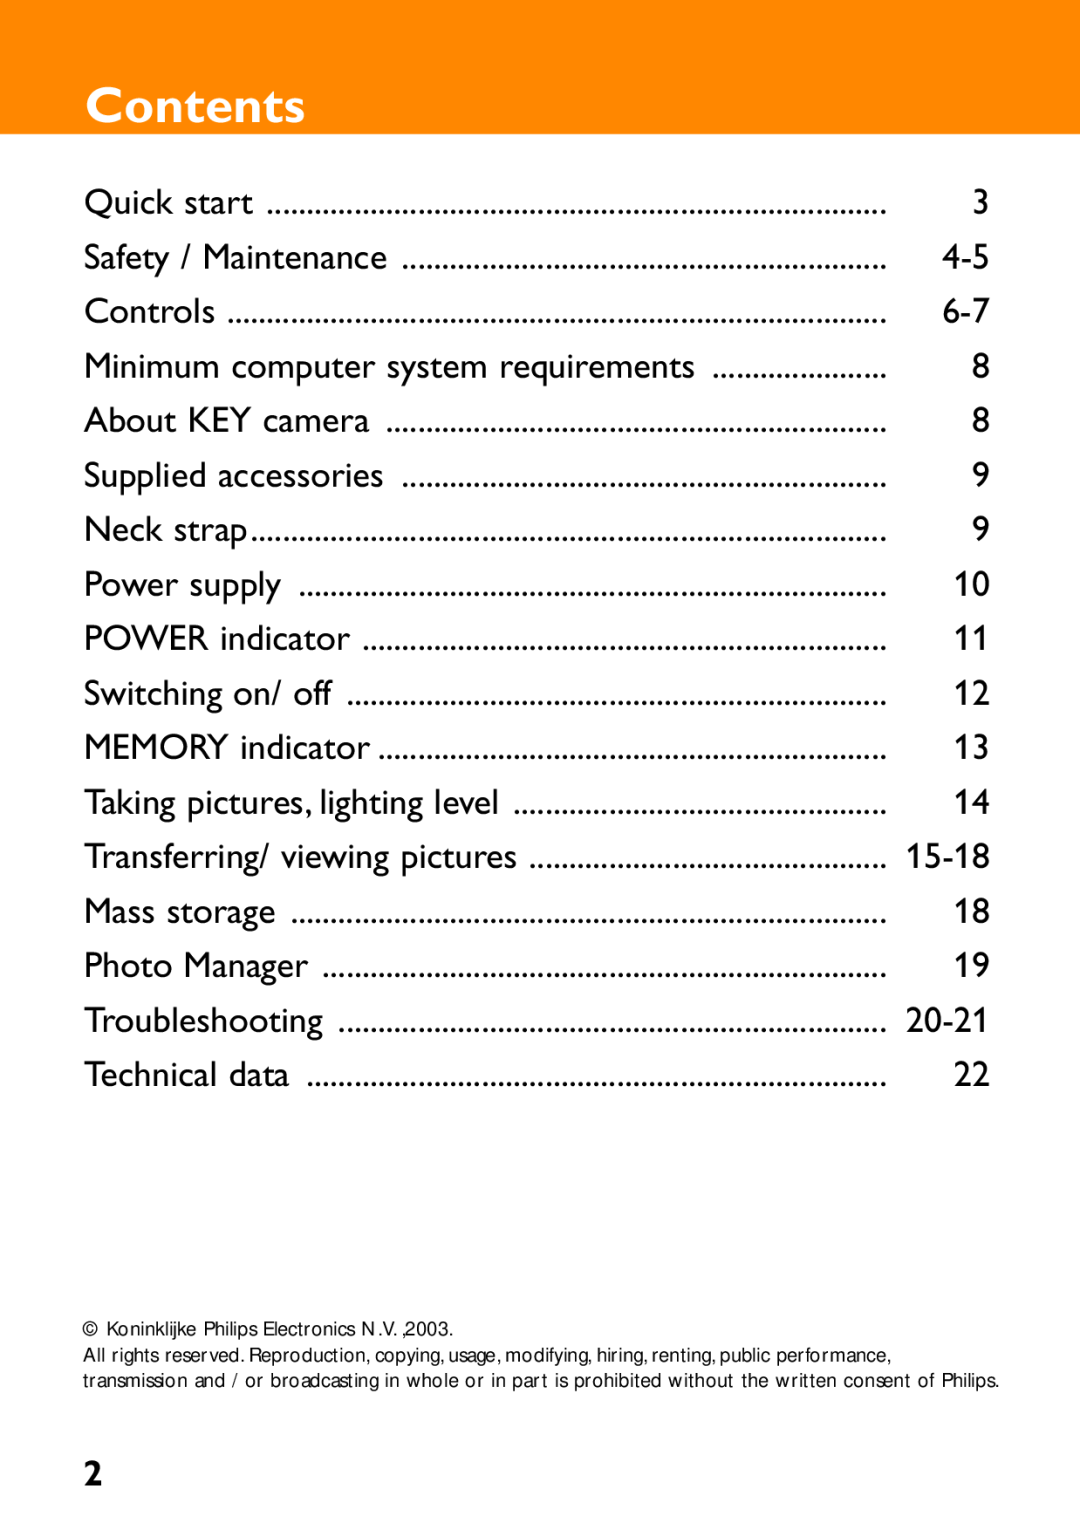 Philips KEY0078 Contents, Quick start, Safety / Maintenance, Minimum computer system requirements, About KEY camera 